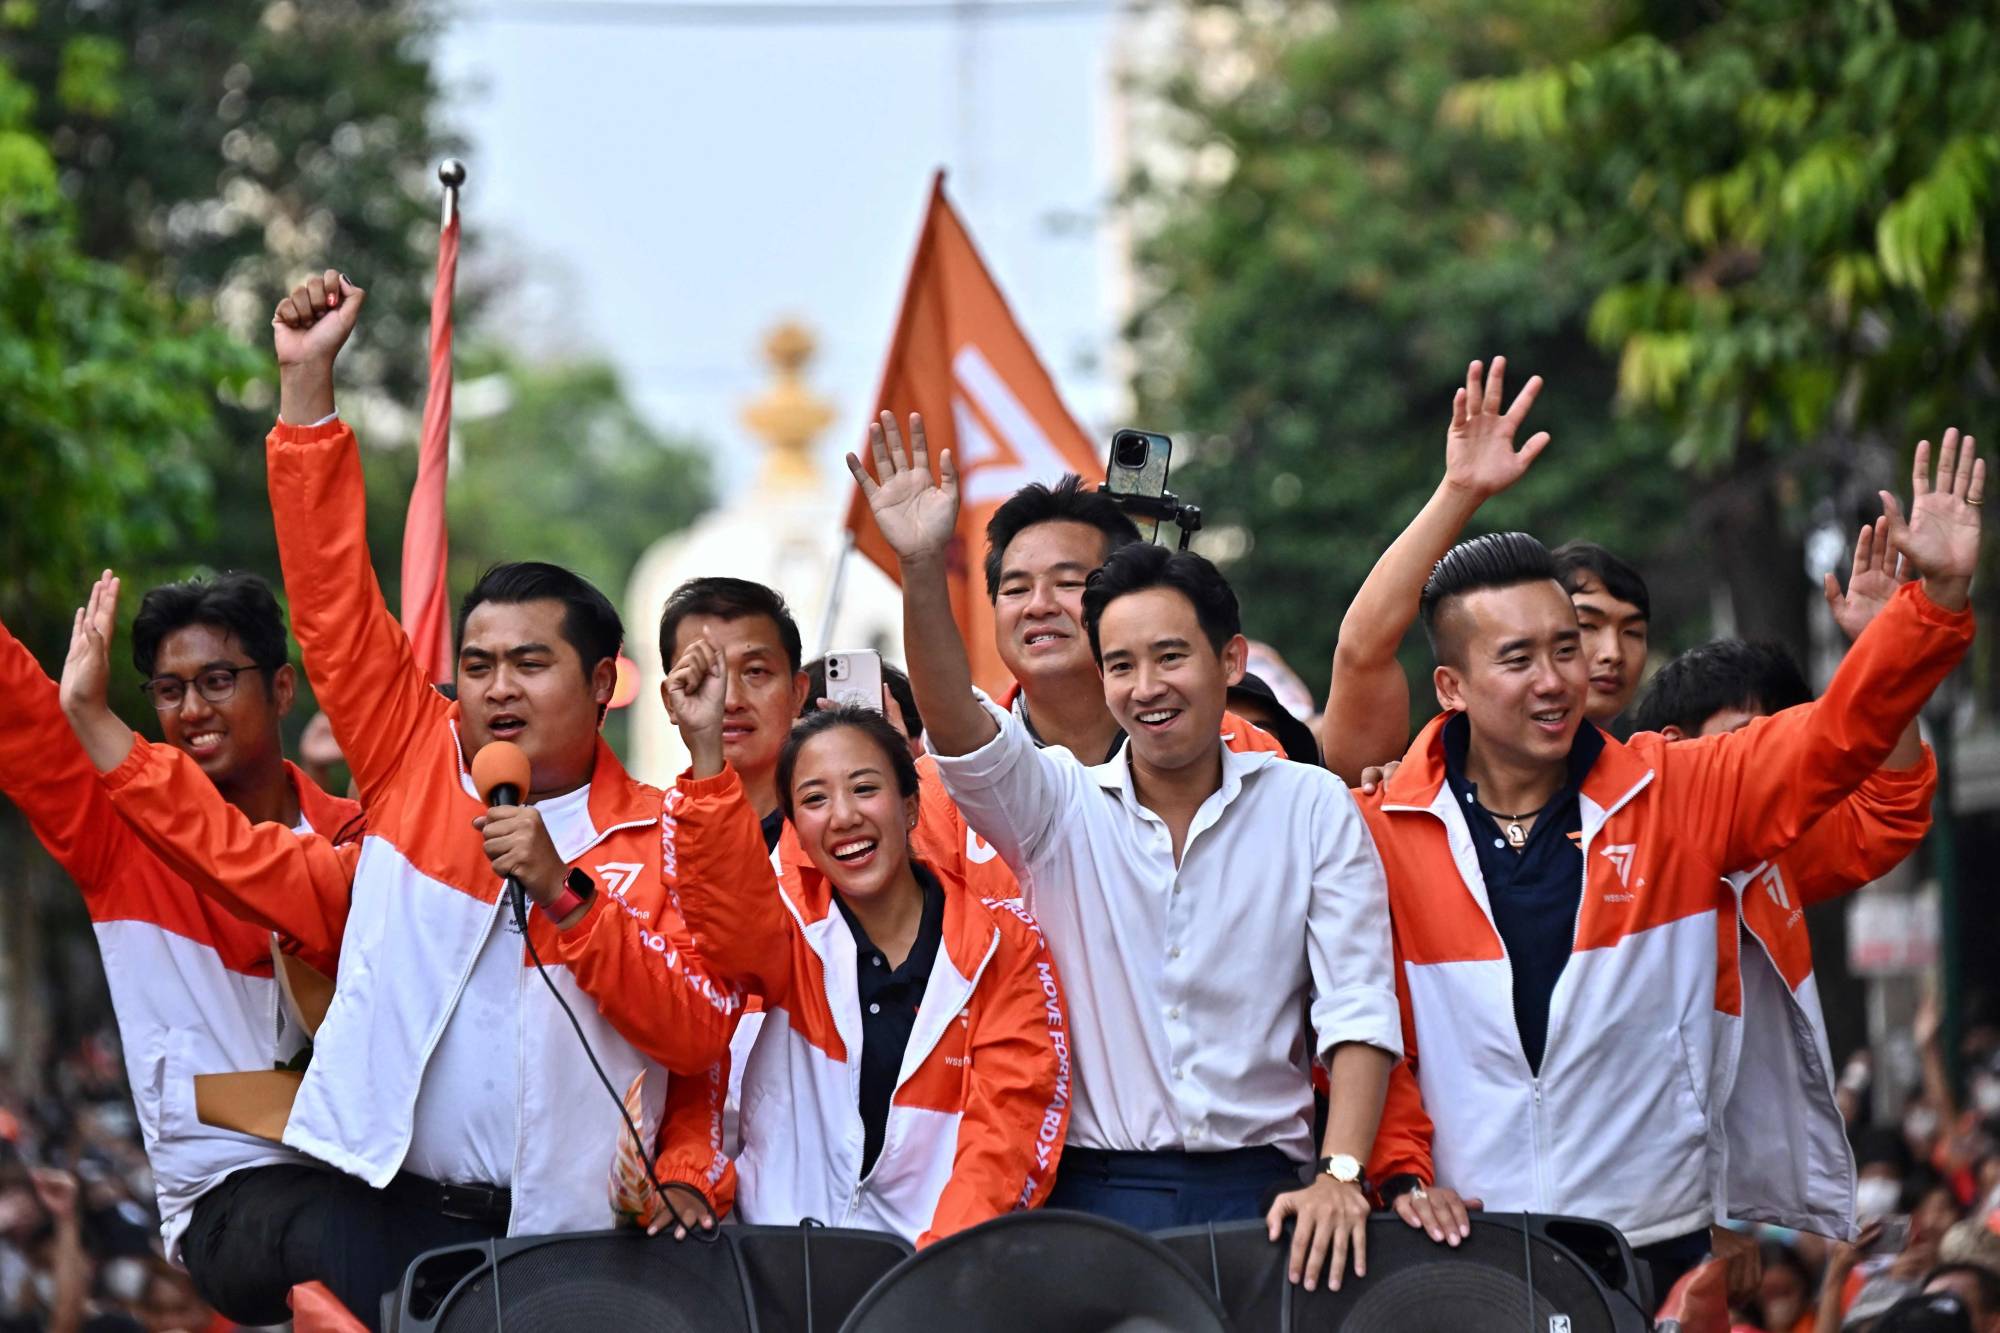 Move Forward Party leader and prime ministerial candidate Pita Limjaroenrat leads a victory parade with fellow party members and supporters on Monday. | AFP-JIJI